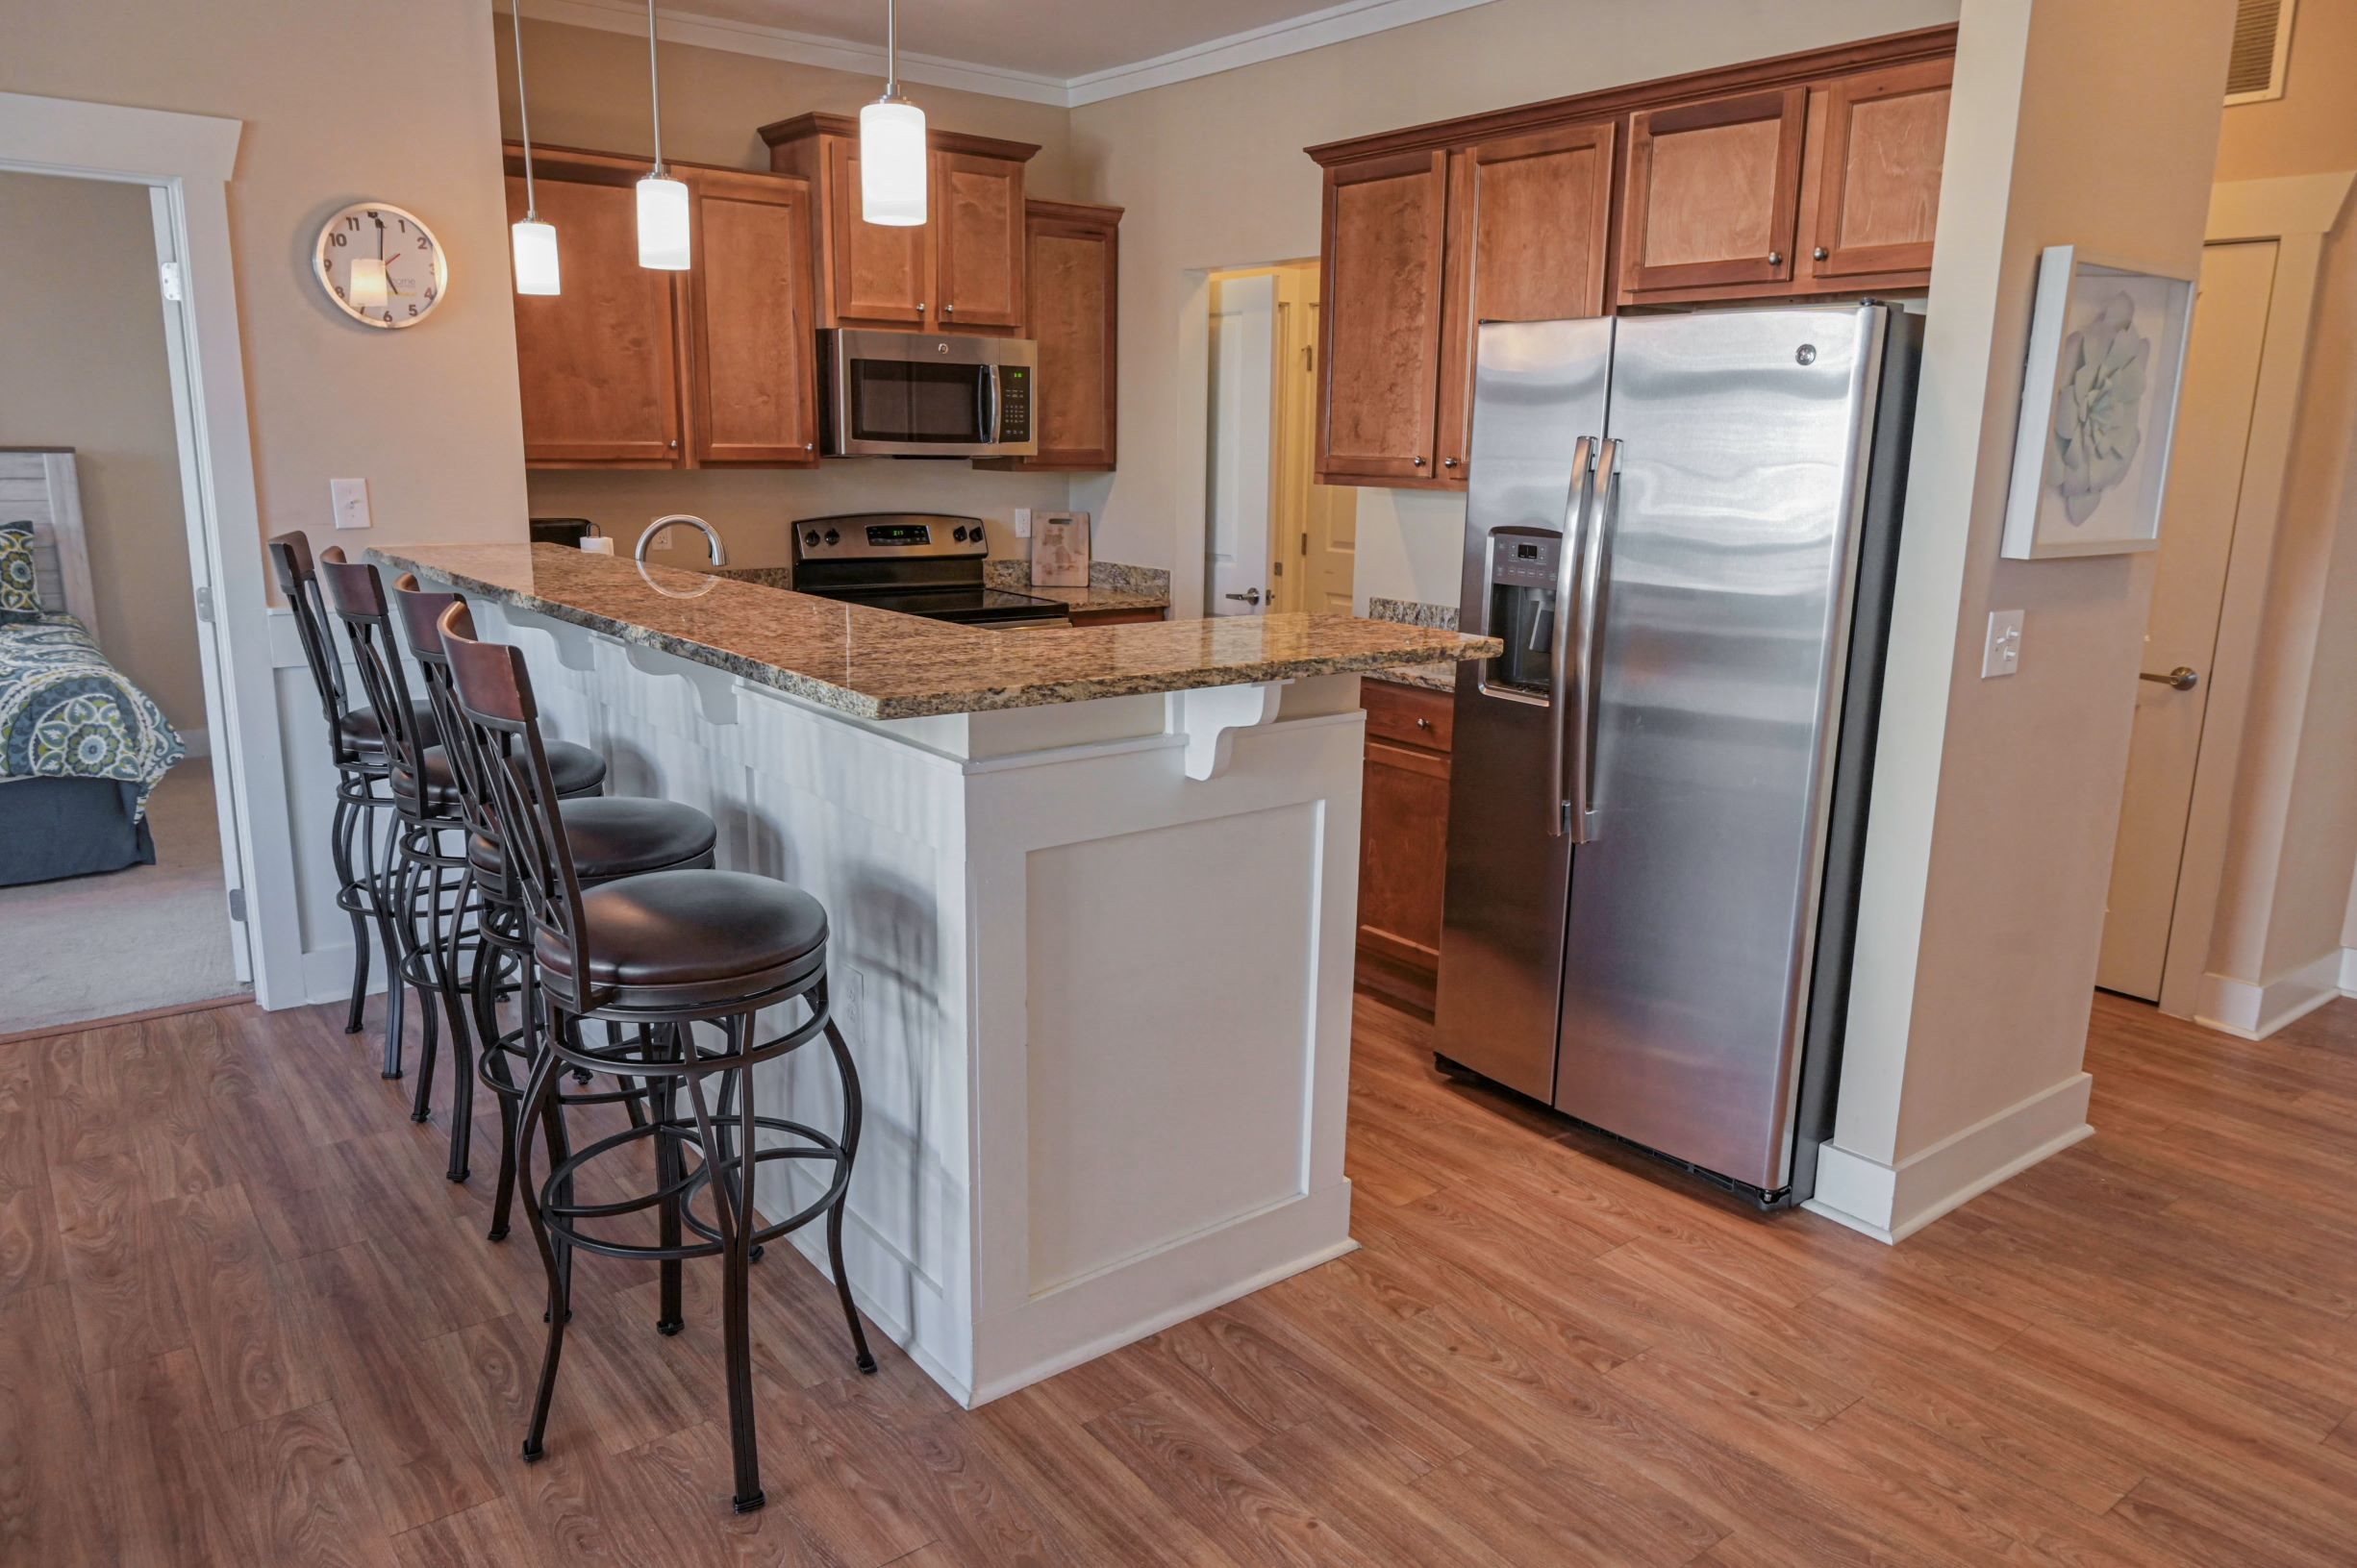 Kitchen at Grand View Luxury Apartments in Wilmington, NC